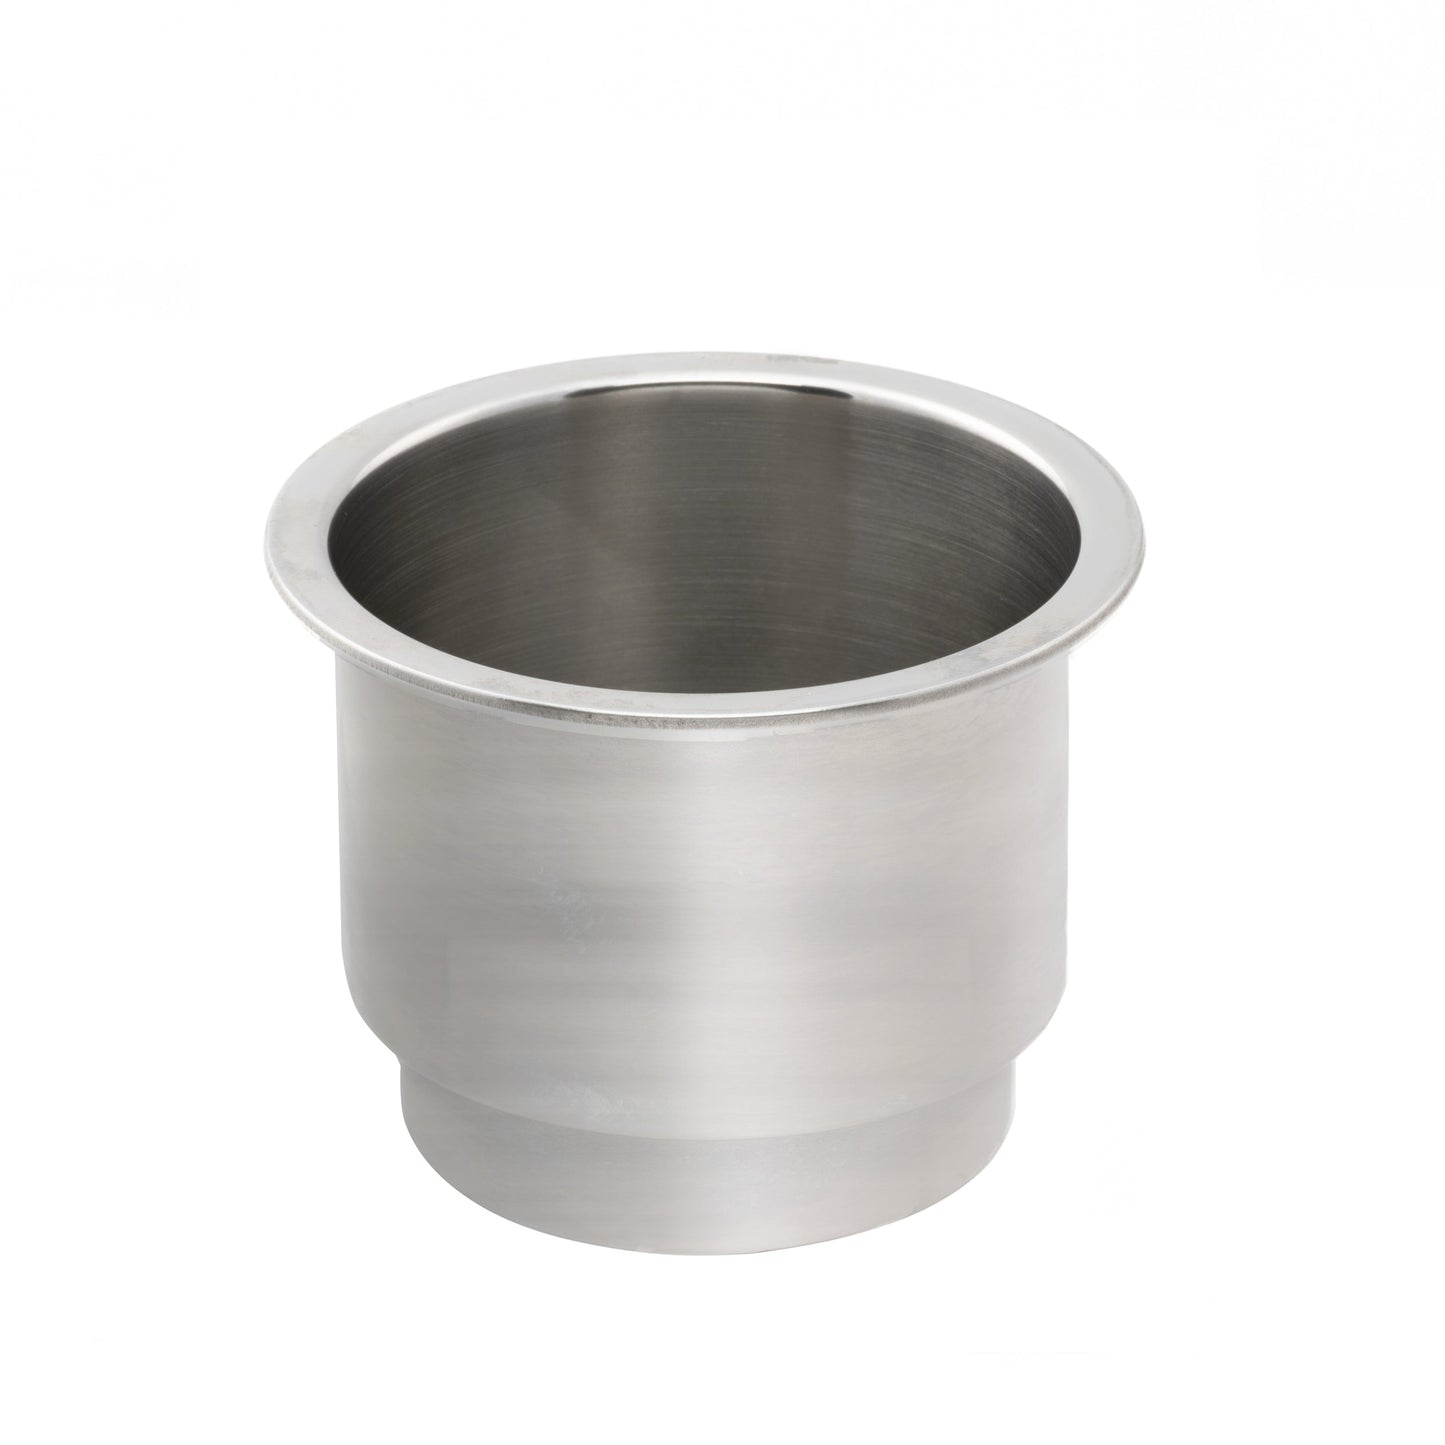 Large (Fits YETI) 304 Stainless Steel Cupholder - S-3503